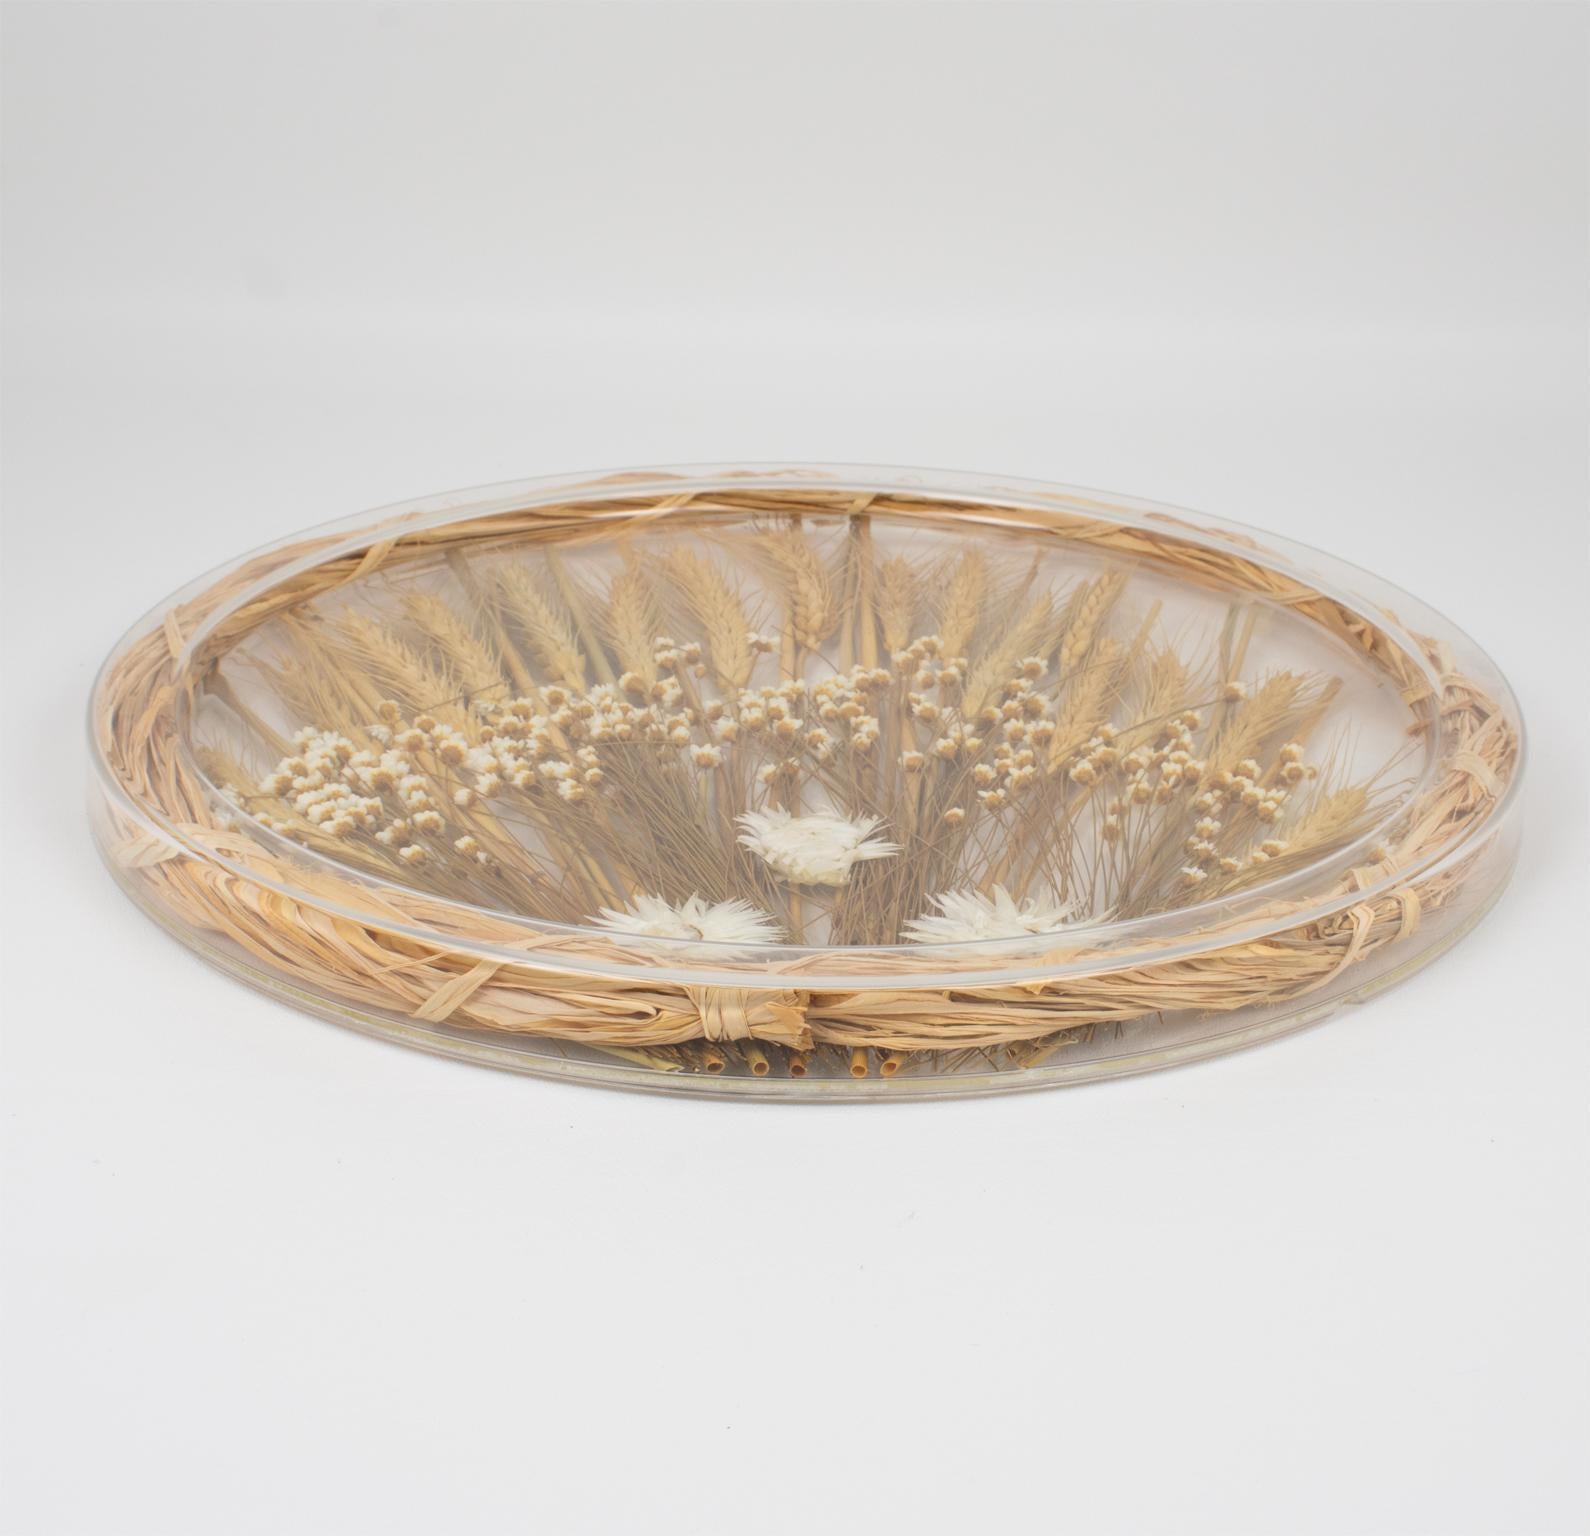 This is a lovely serving tray designed by Alpac Creations, France, in the 1980s. This board or platter has a rounded shape and raised edges. 
The platter has a natural organic touch and is built with clear Lucite or plexiglass and genuine wheat and